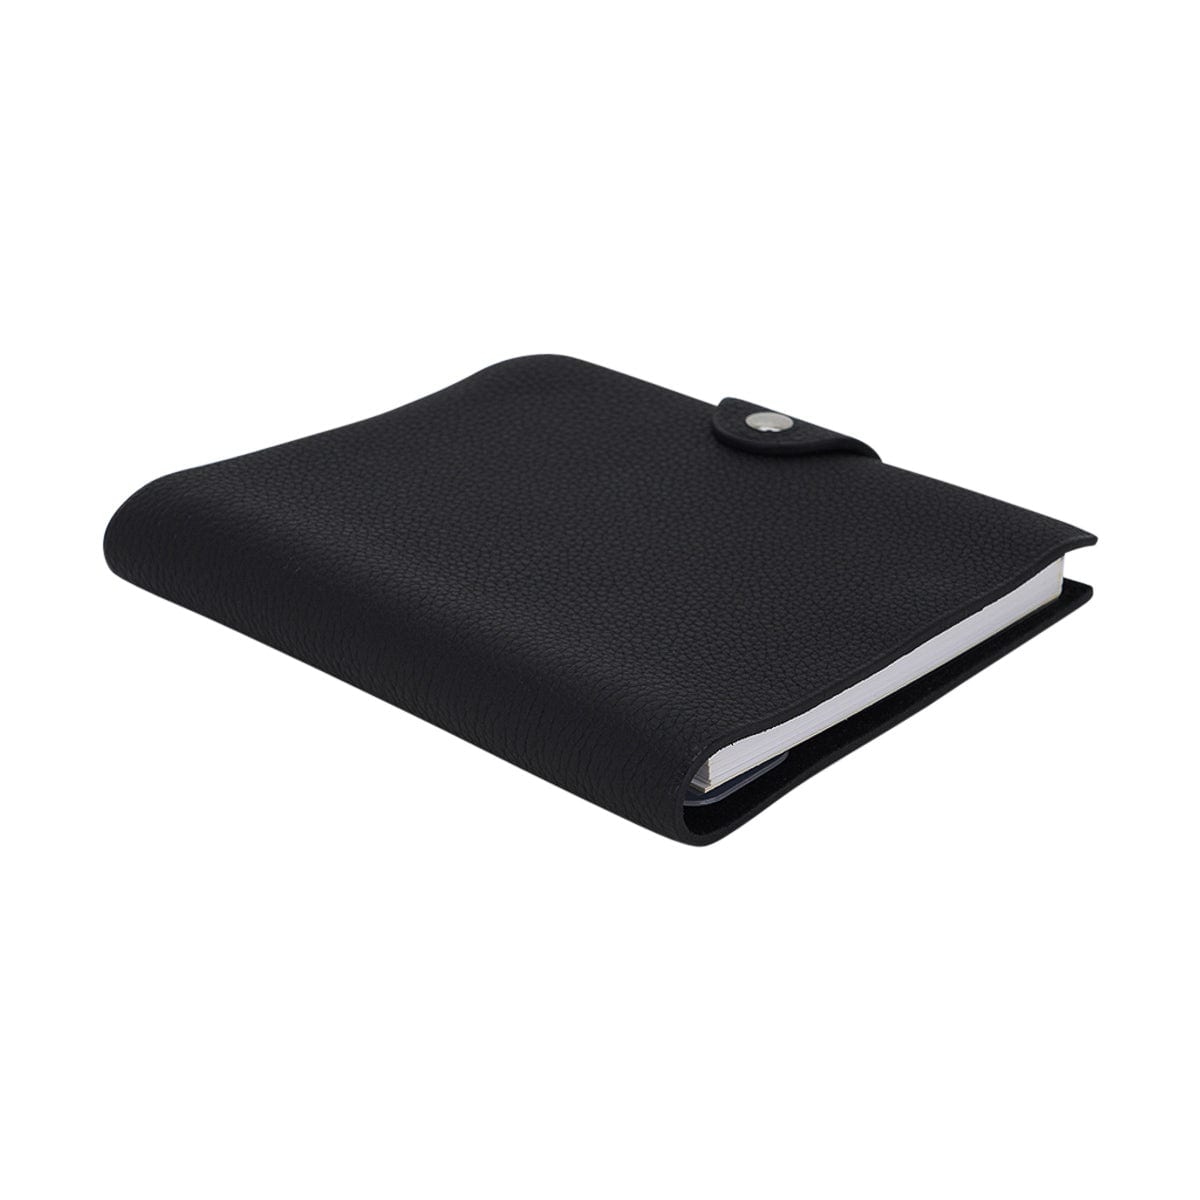 Hermes Ulysse Notebook Cover Black PM Model with Refill